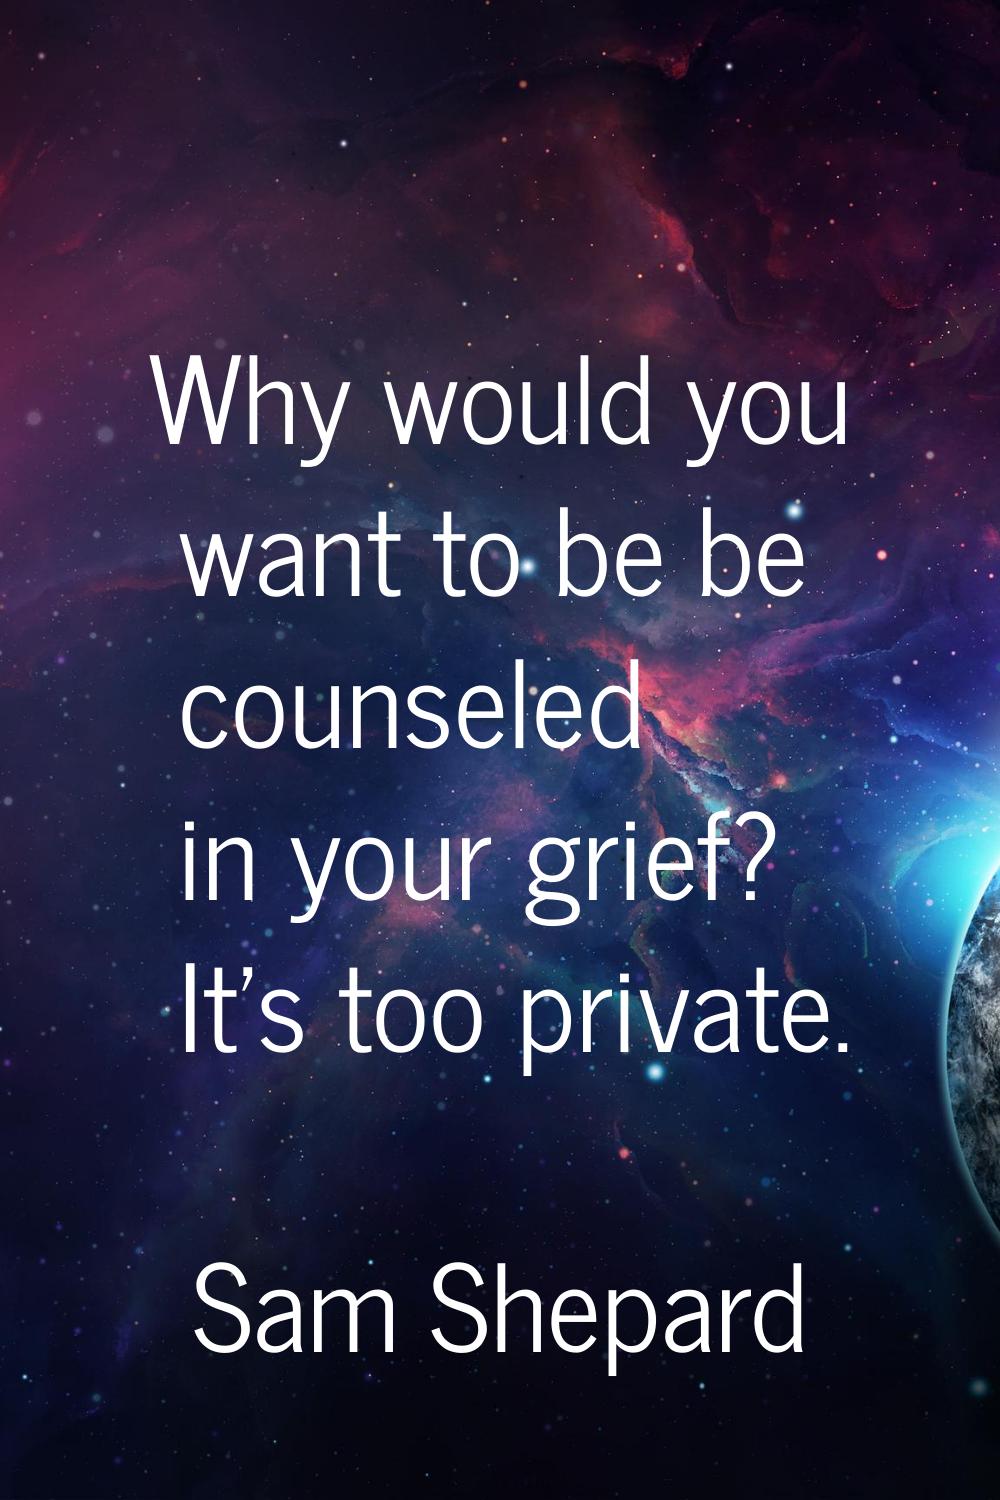 Why would you want to be be counseled in your grief? It's too private.